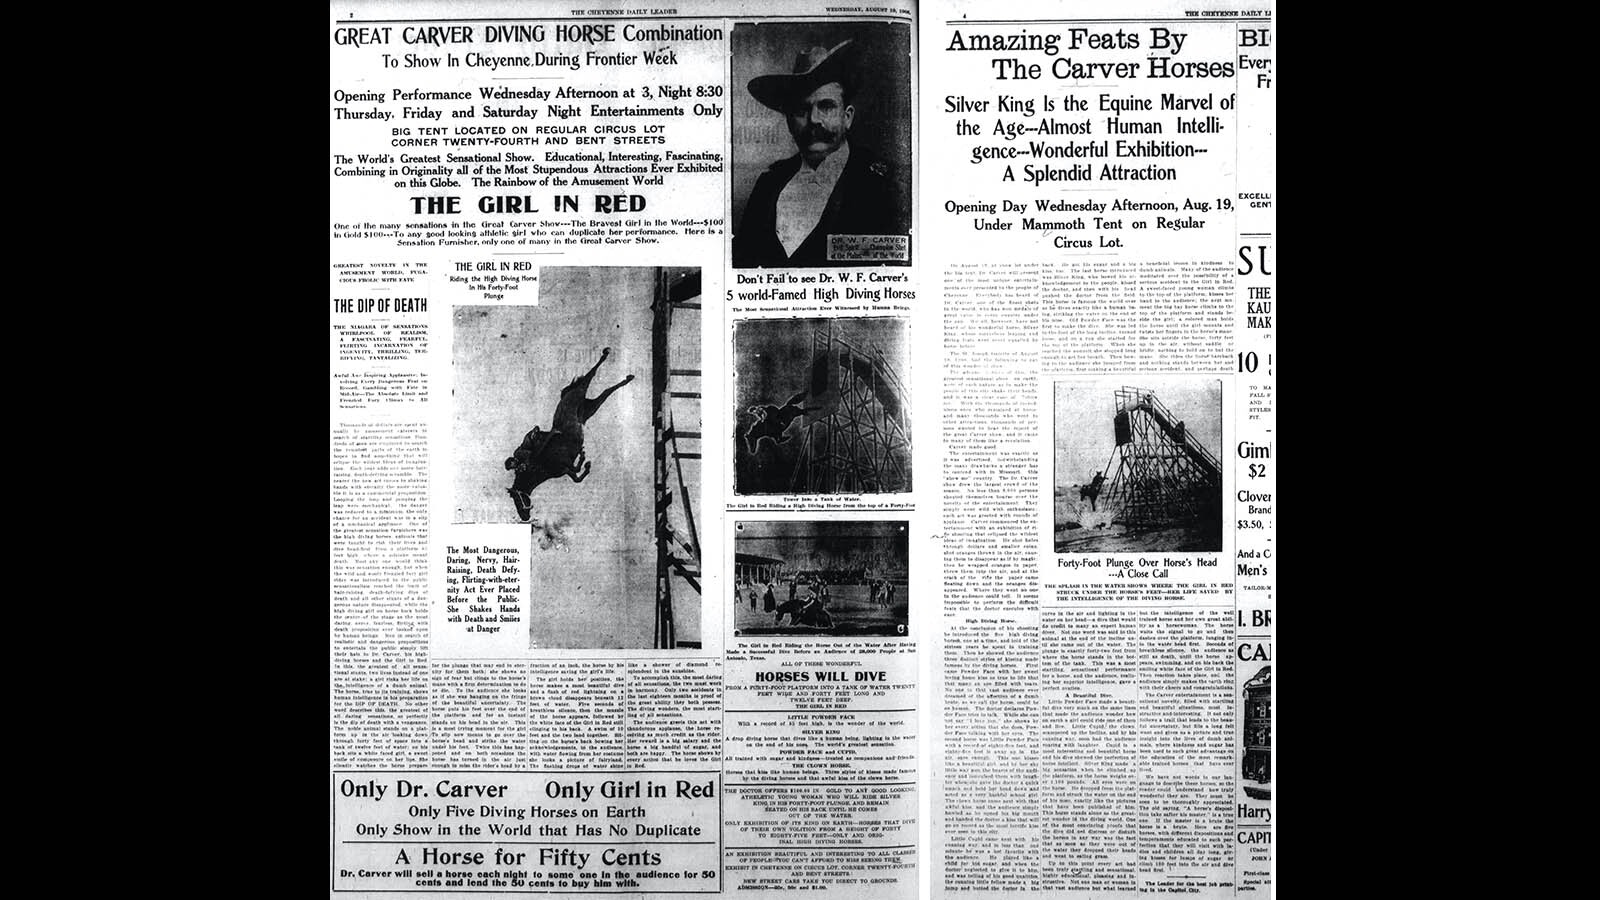 Carver's Diving Horses debut in Wyoming in 1908, as reported in the Cheyenne Daily Leader.